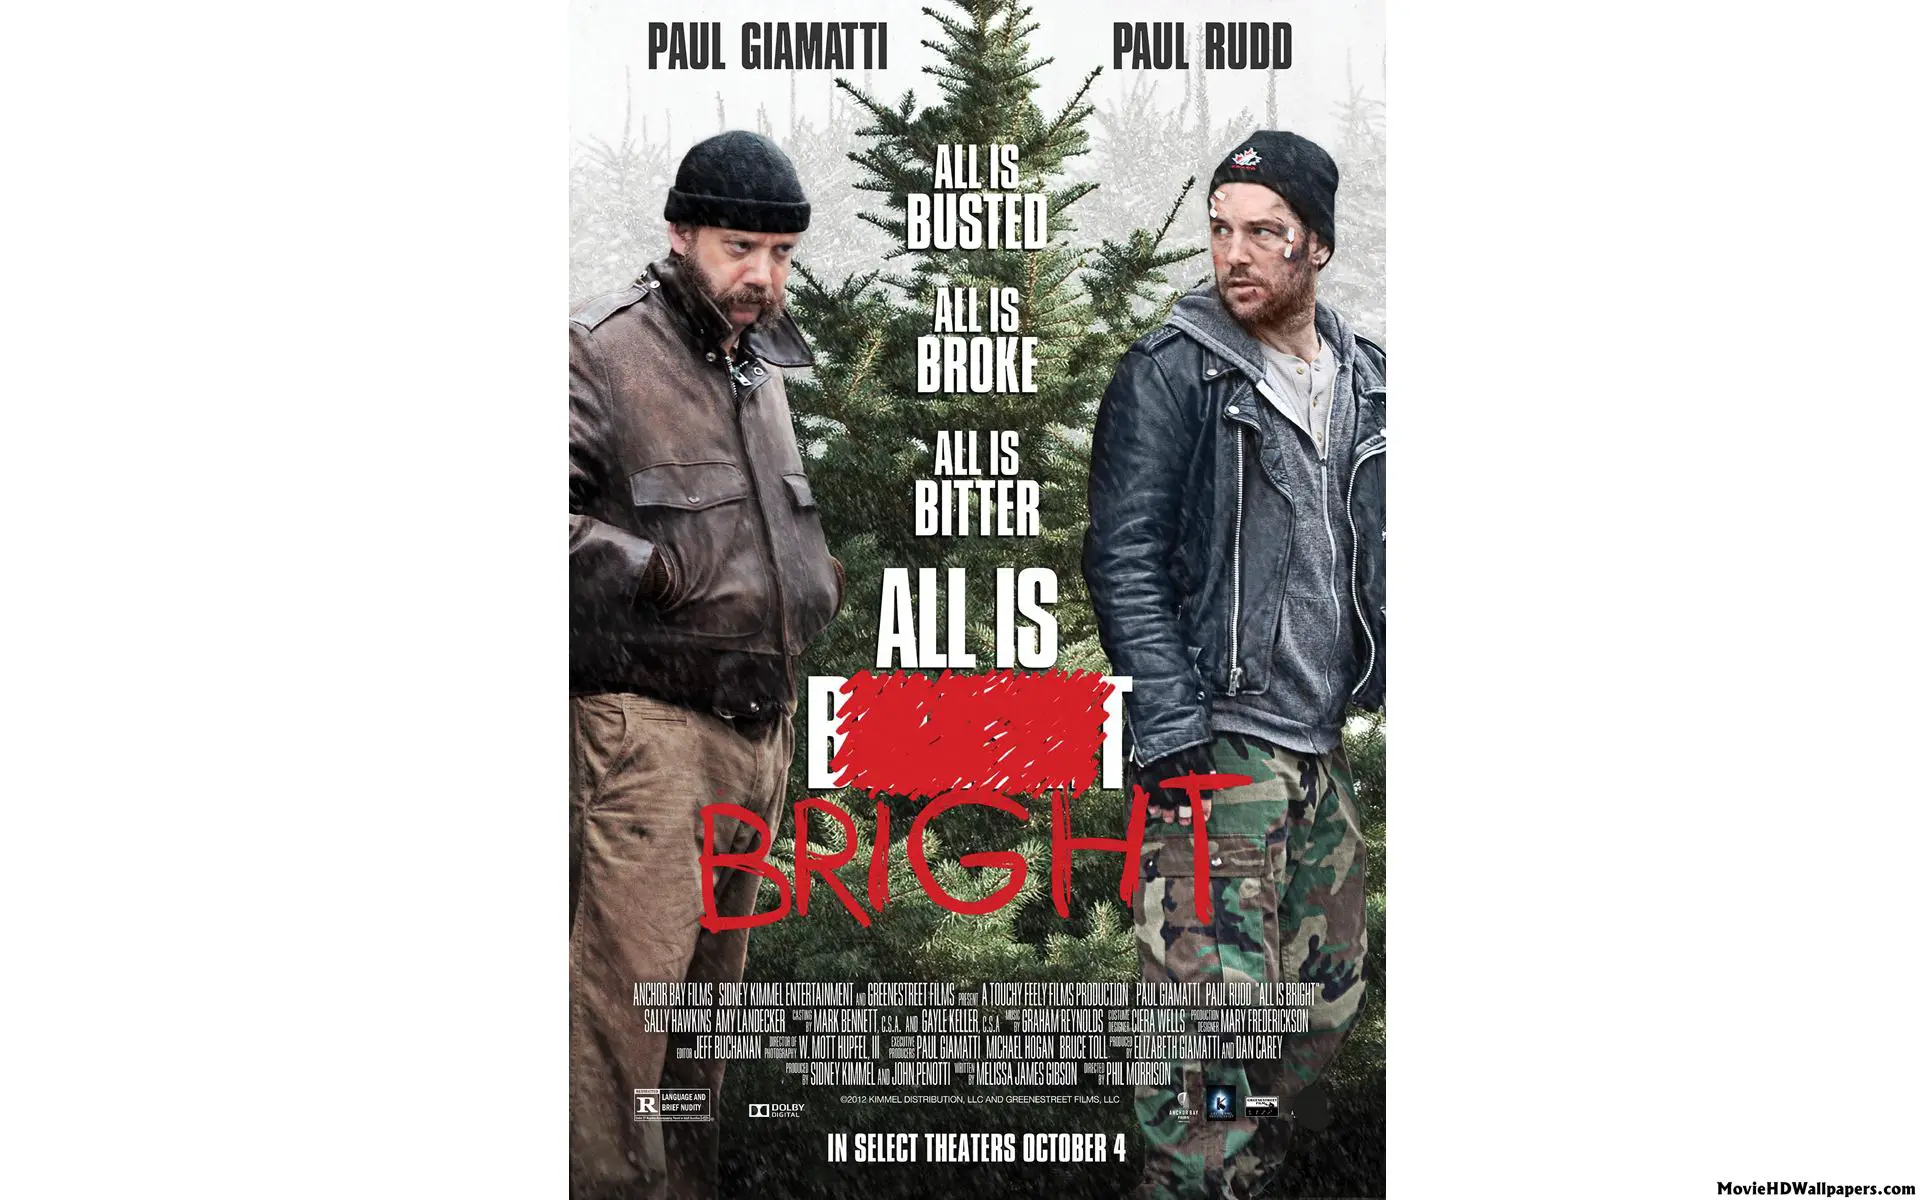 All is Bright (2013)